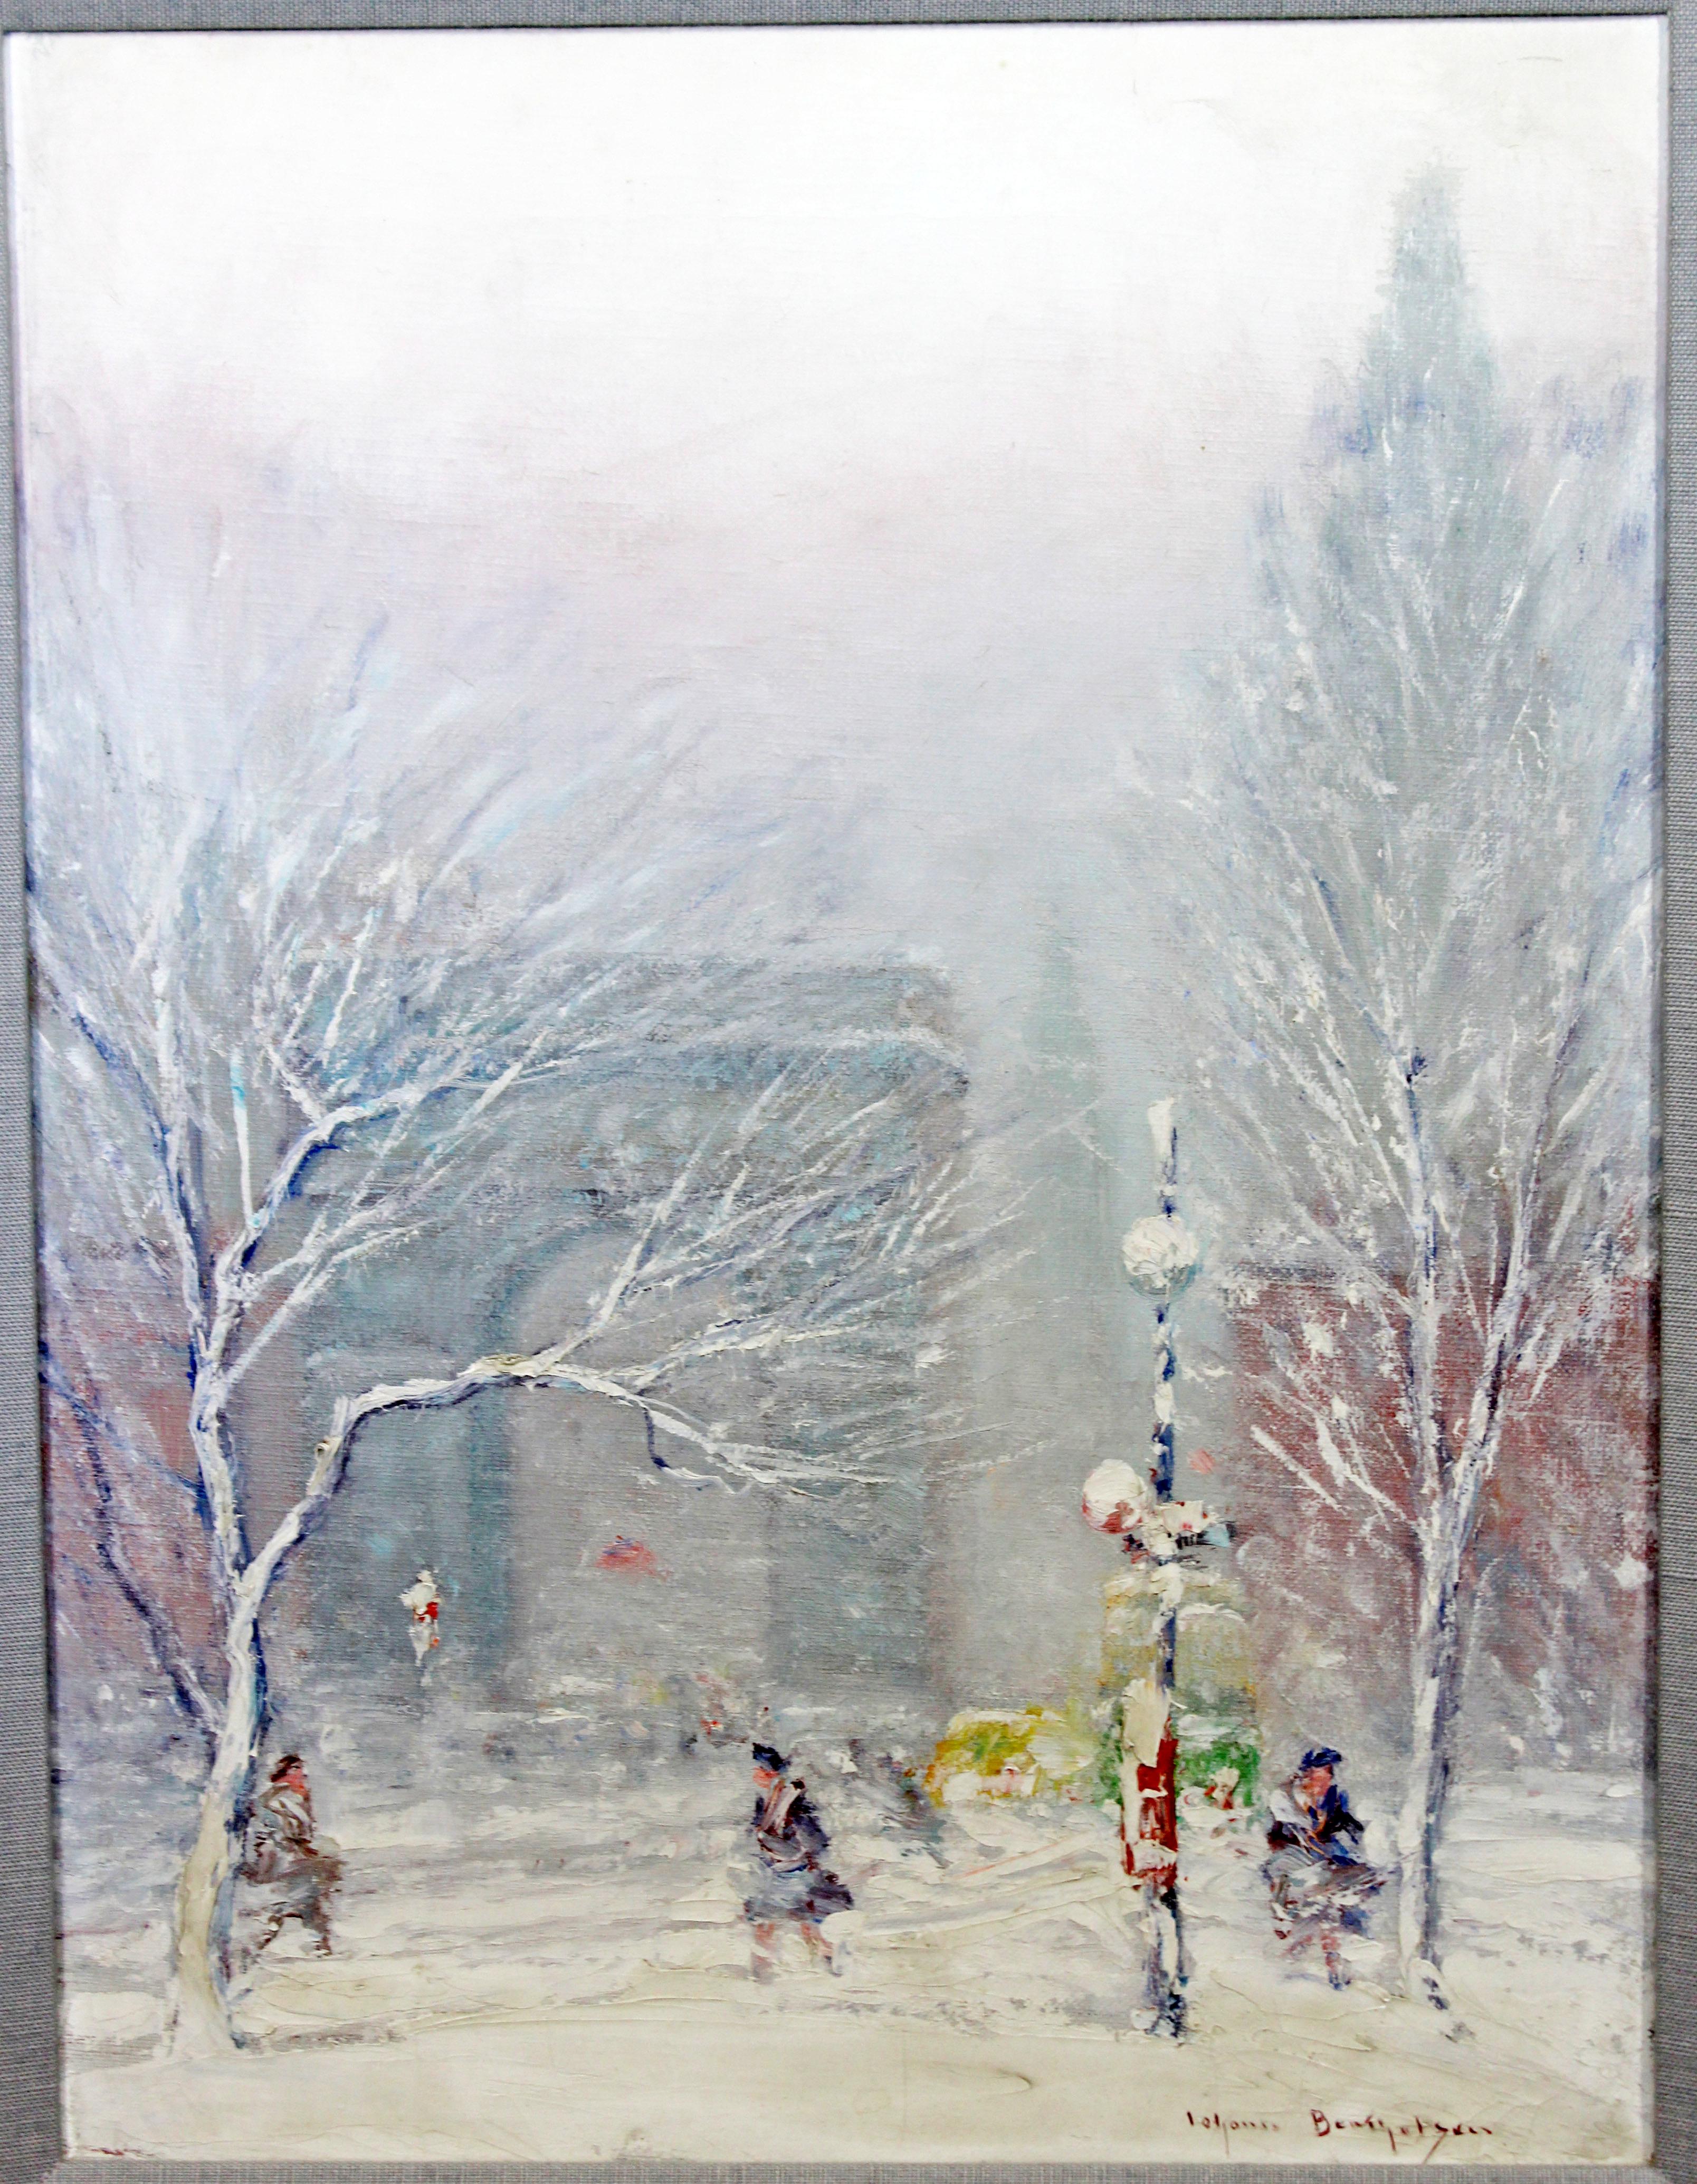 For your consideration is a gorgeous, framed, impressionist painting of a winter scene, signed Johann Berthelsen on canvas. In excellent condition. The dimensions of the frame are 16.5